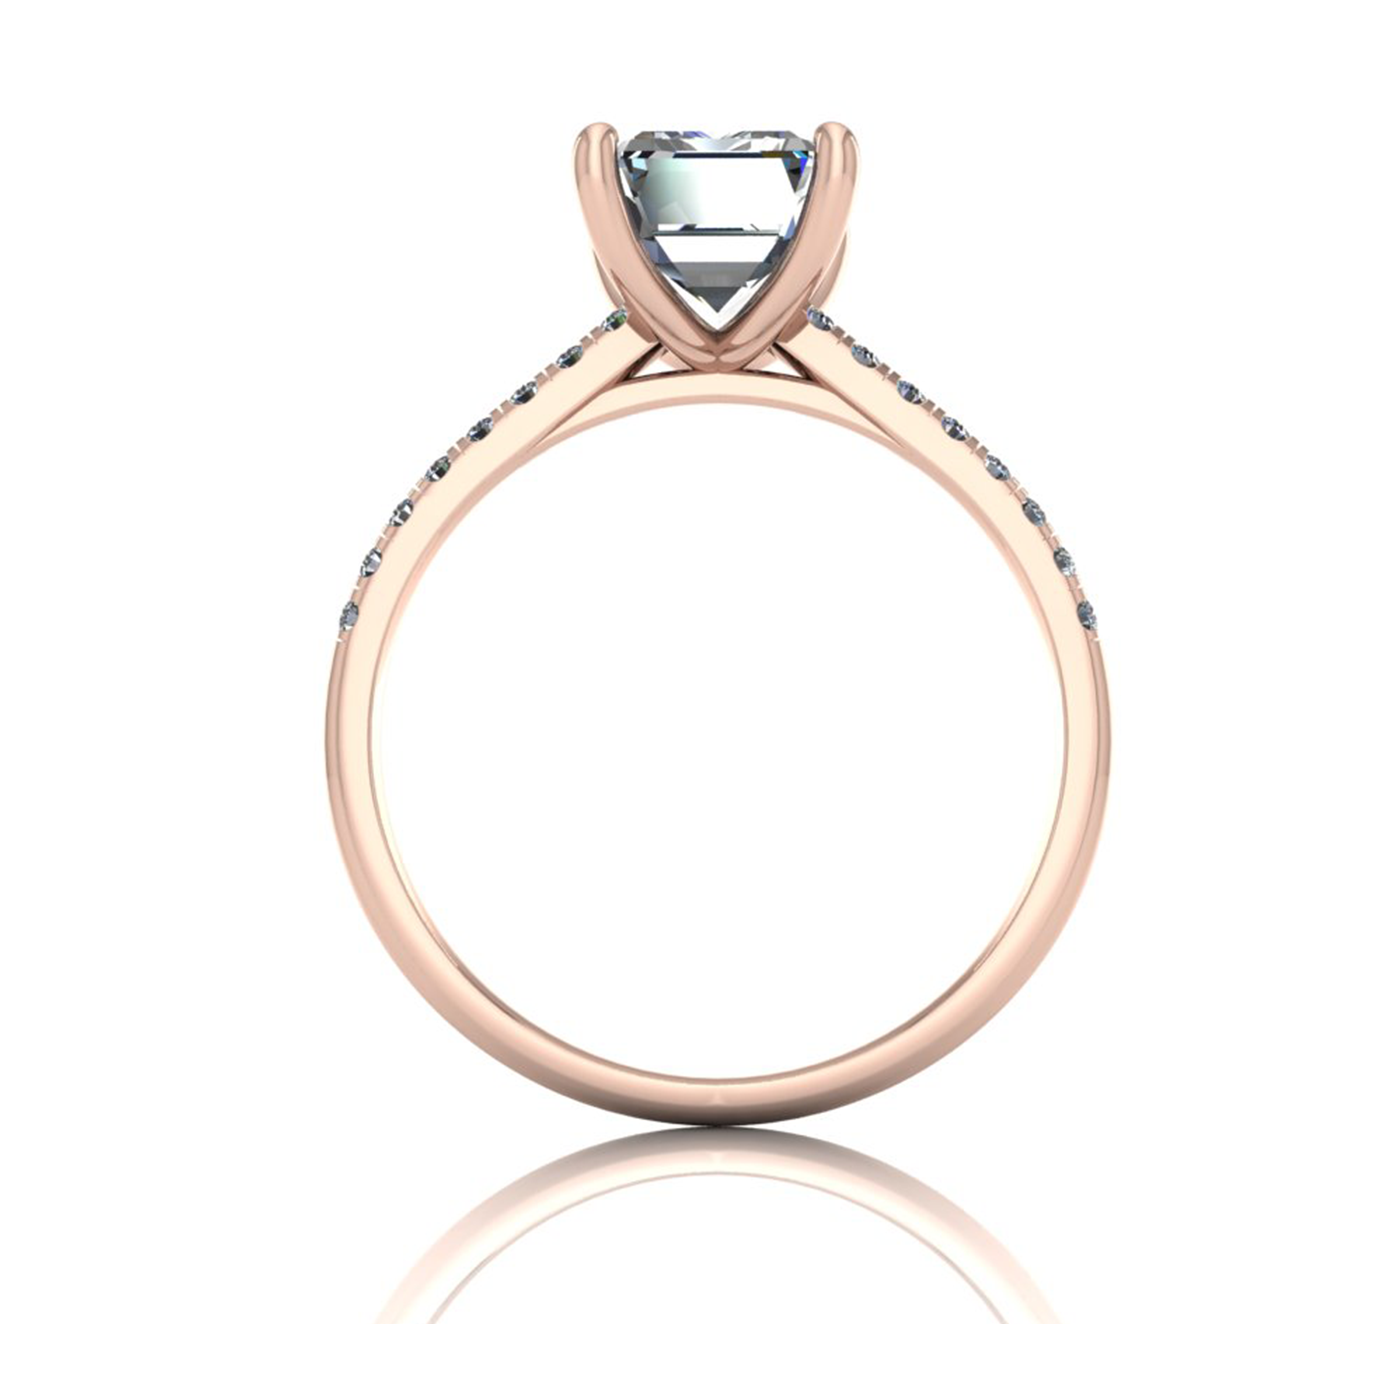 18k rose gold 1.5ct 4 prongs emerald cut diamond engagement ring with whisper thin pavÉ set band